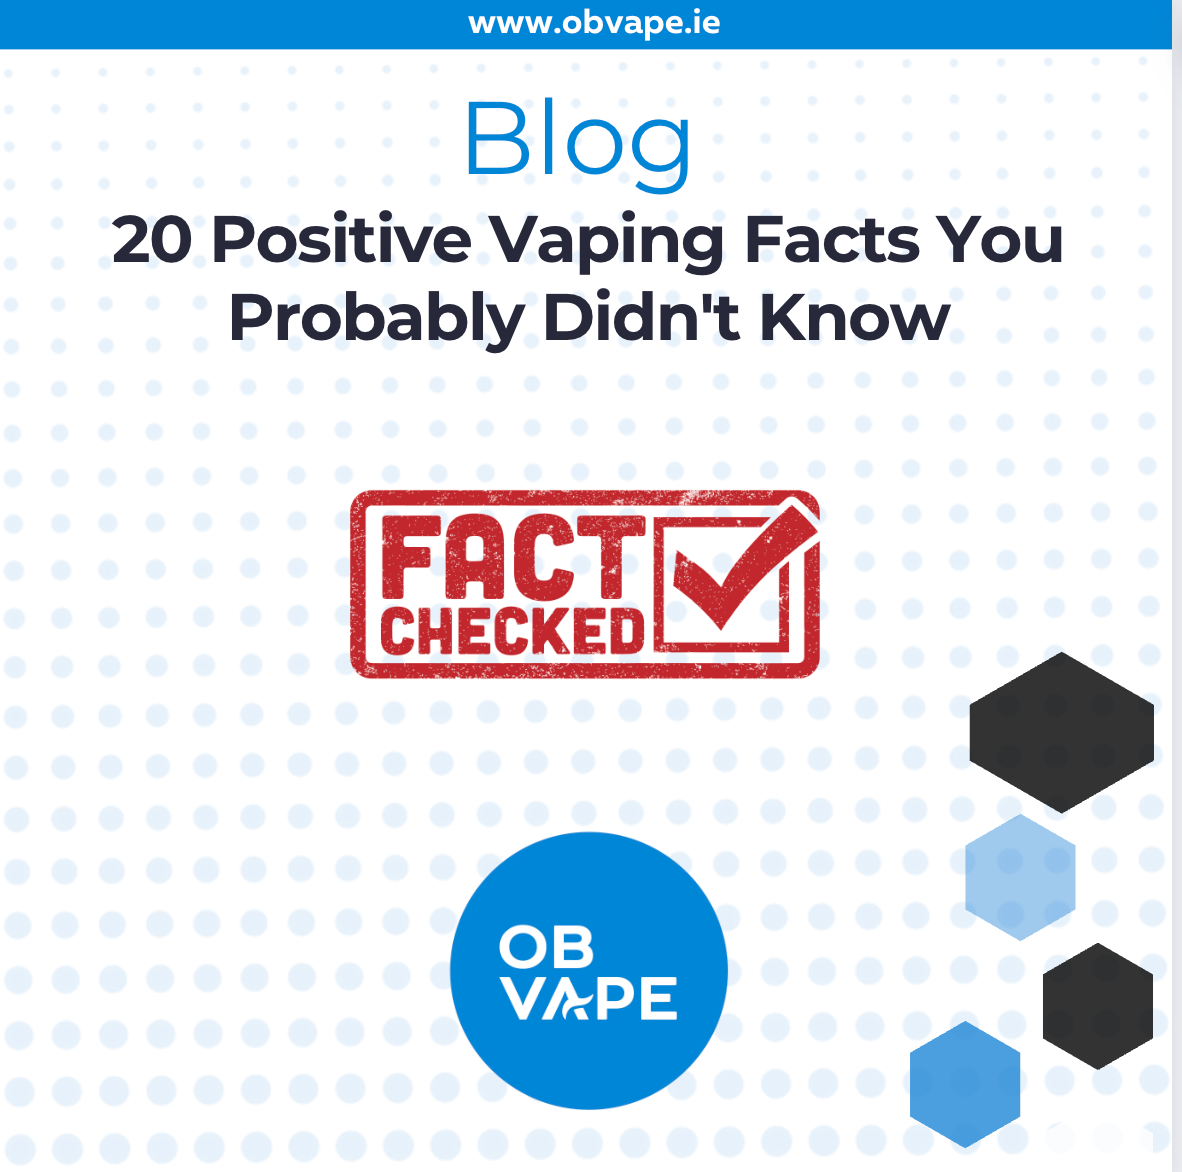 20 Positive Vaping Facts You Probably Didn't Know